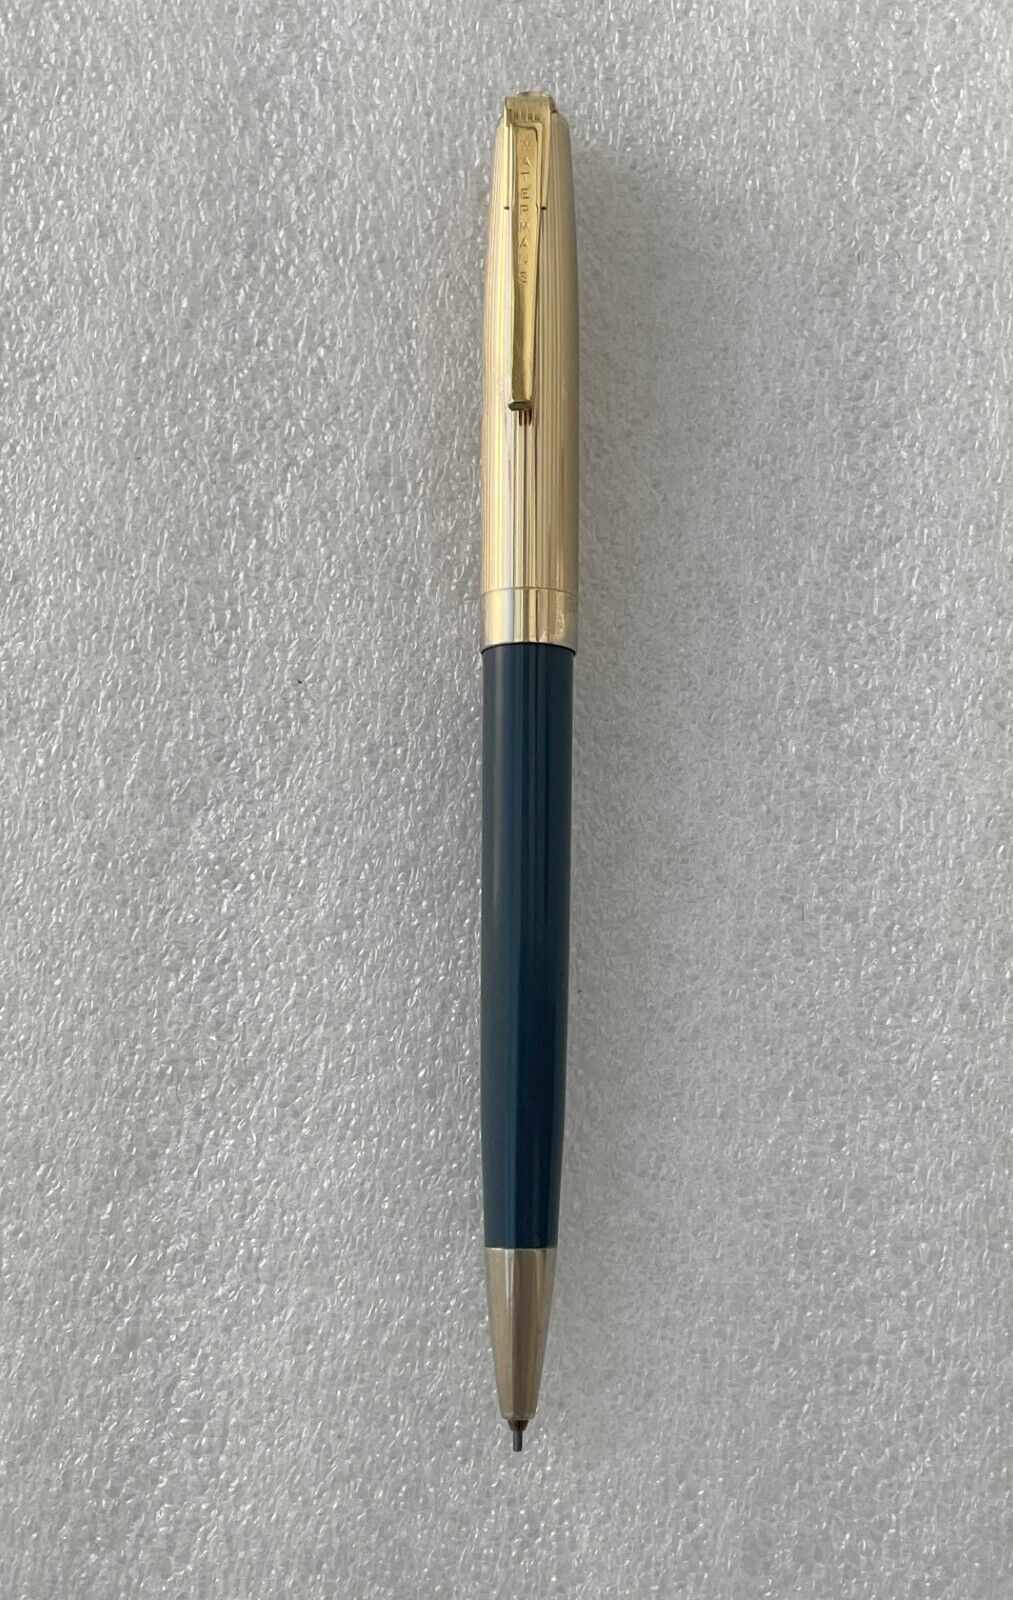 Rare 1951 Waterman Corinth Pencil with Gold Plated Cap (  1 year in production)